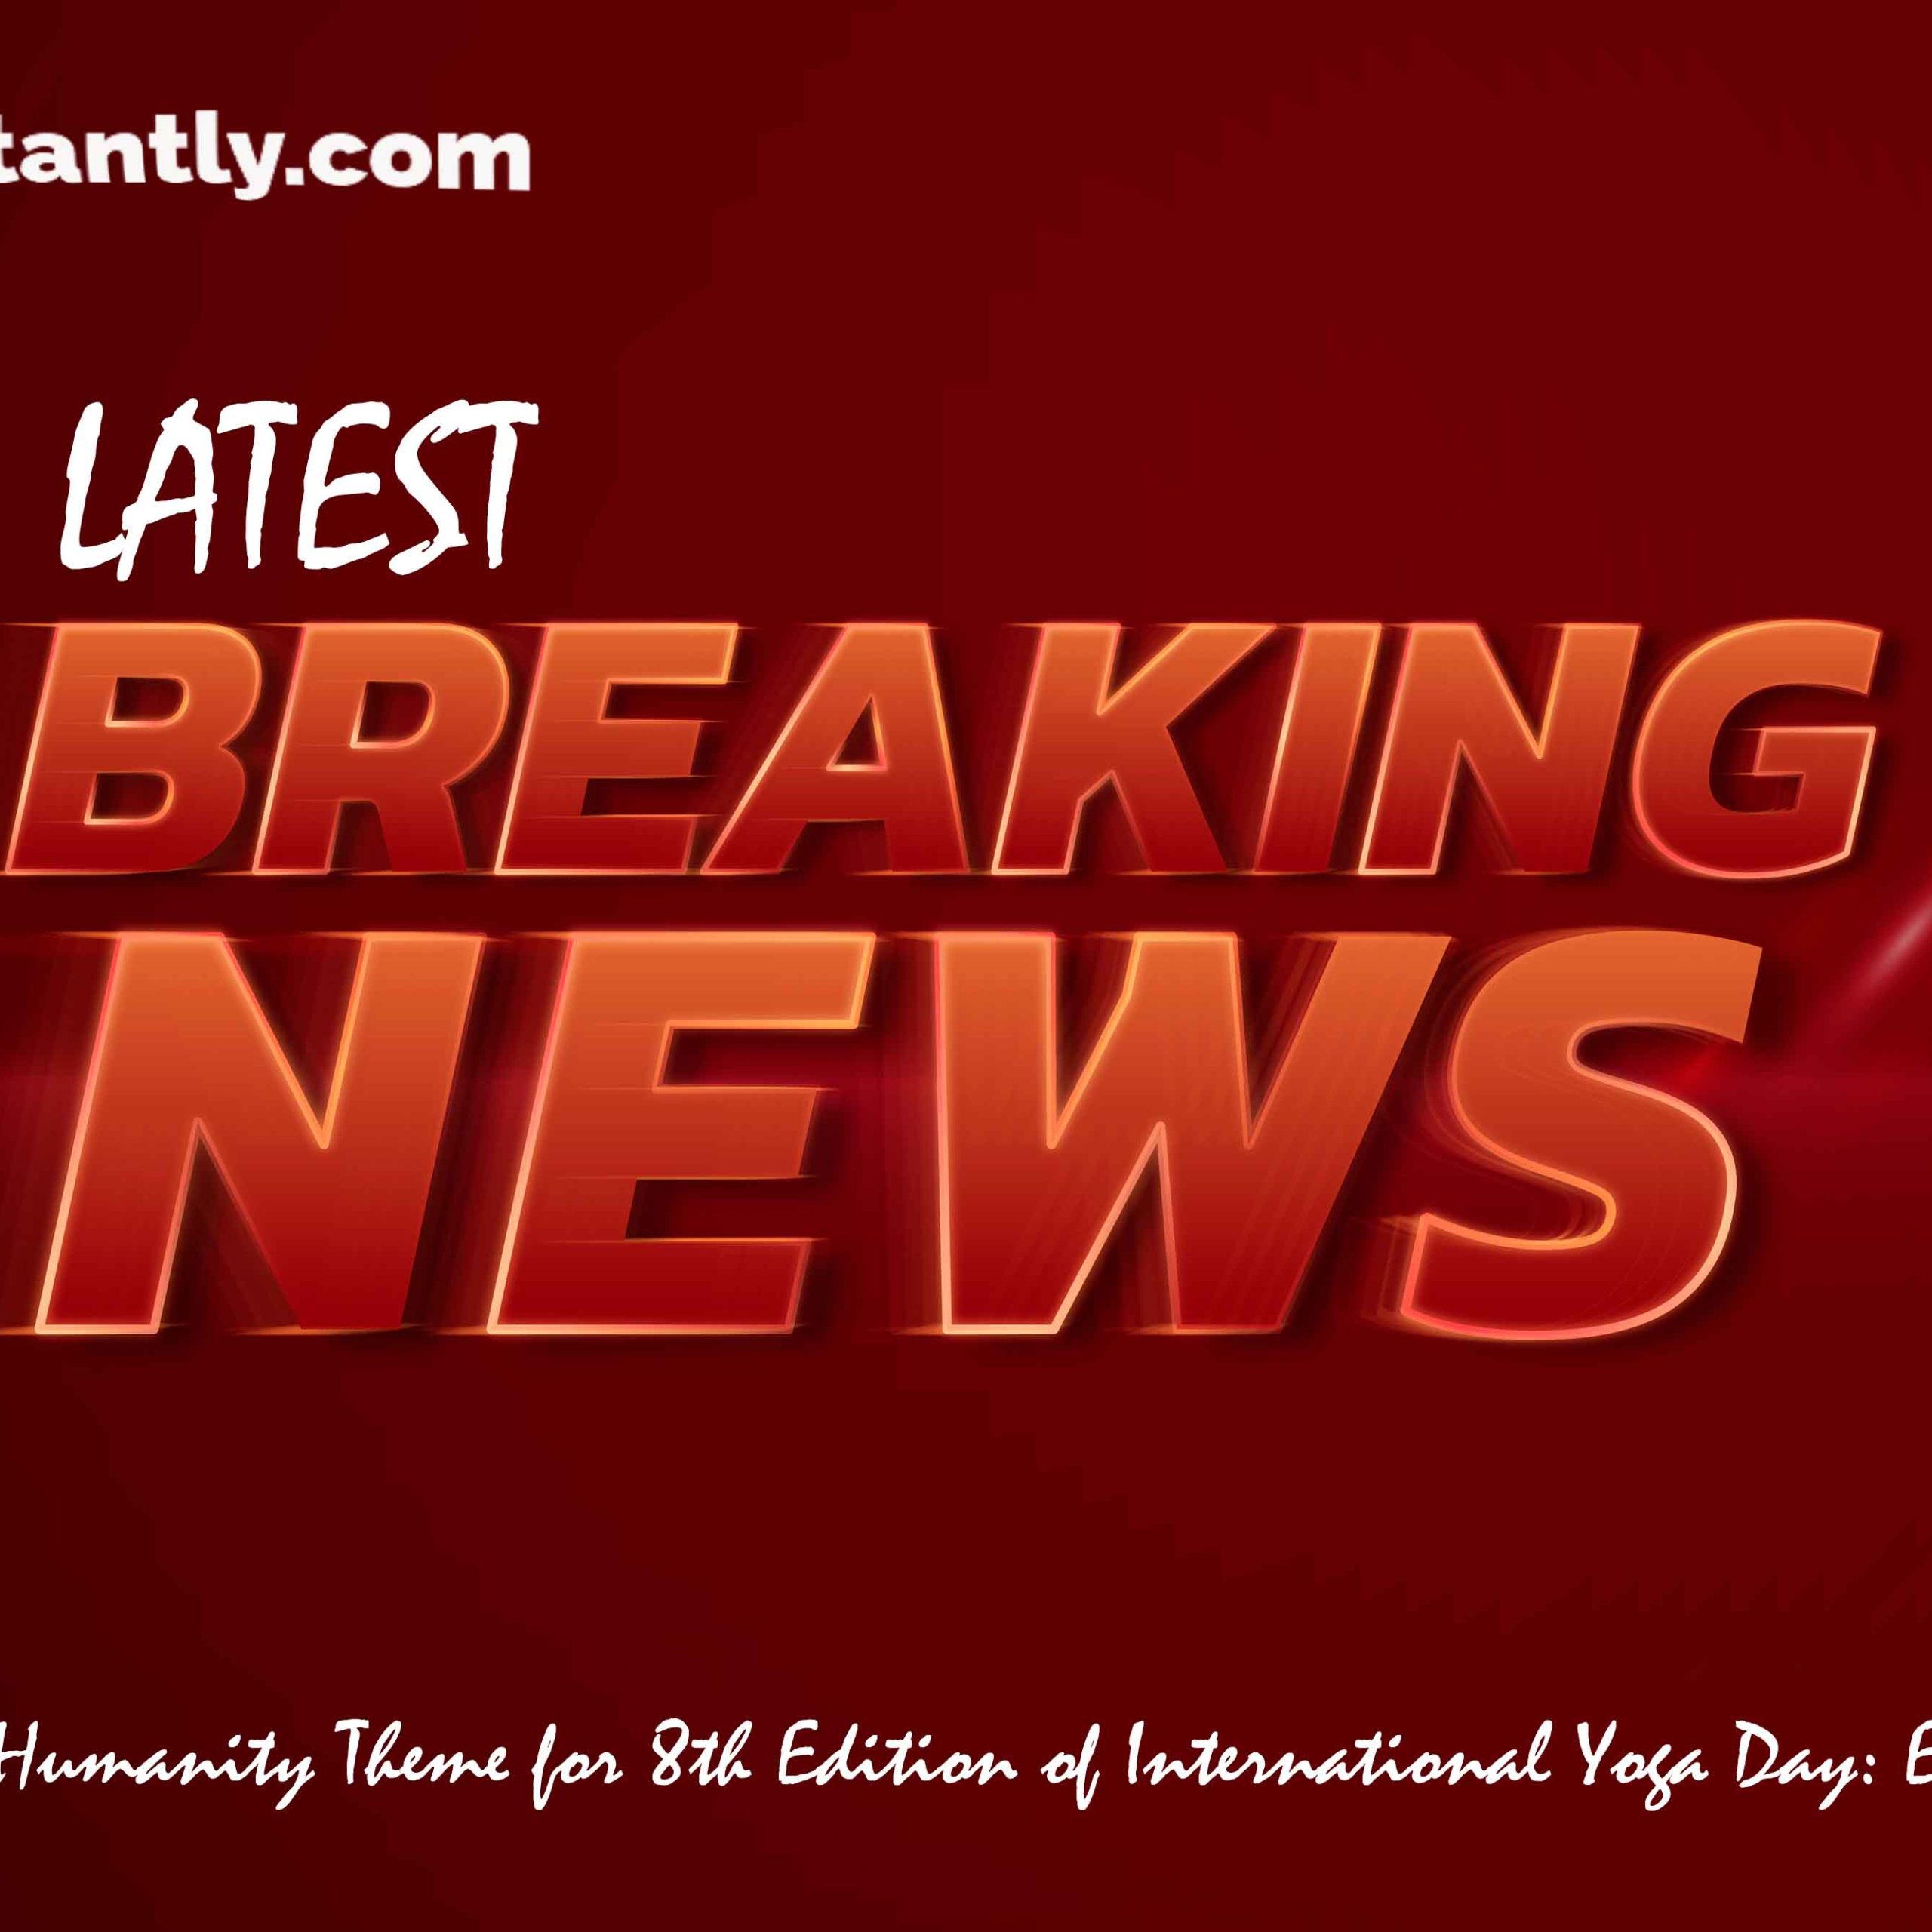 Yoga for Humanity Theme for 8th Edition of International Yoga Day: EInstantly